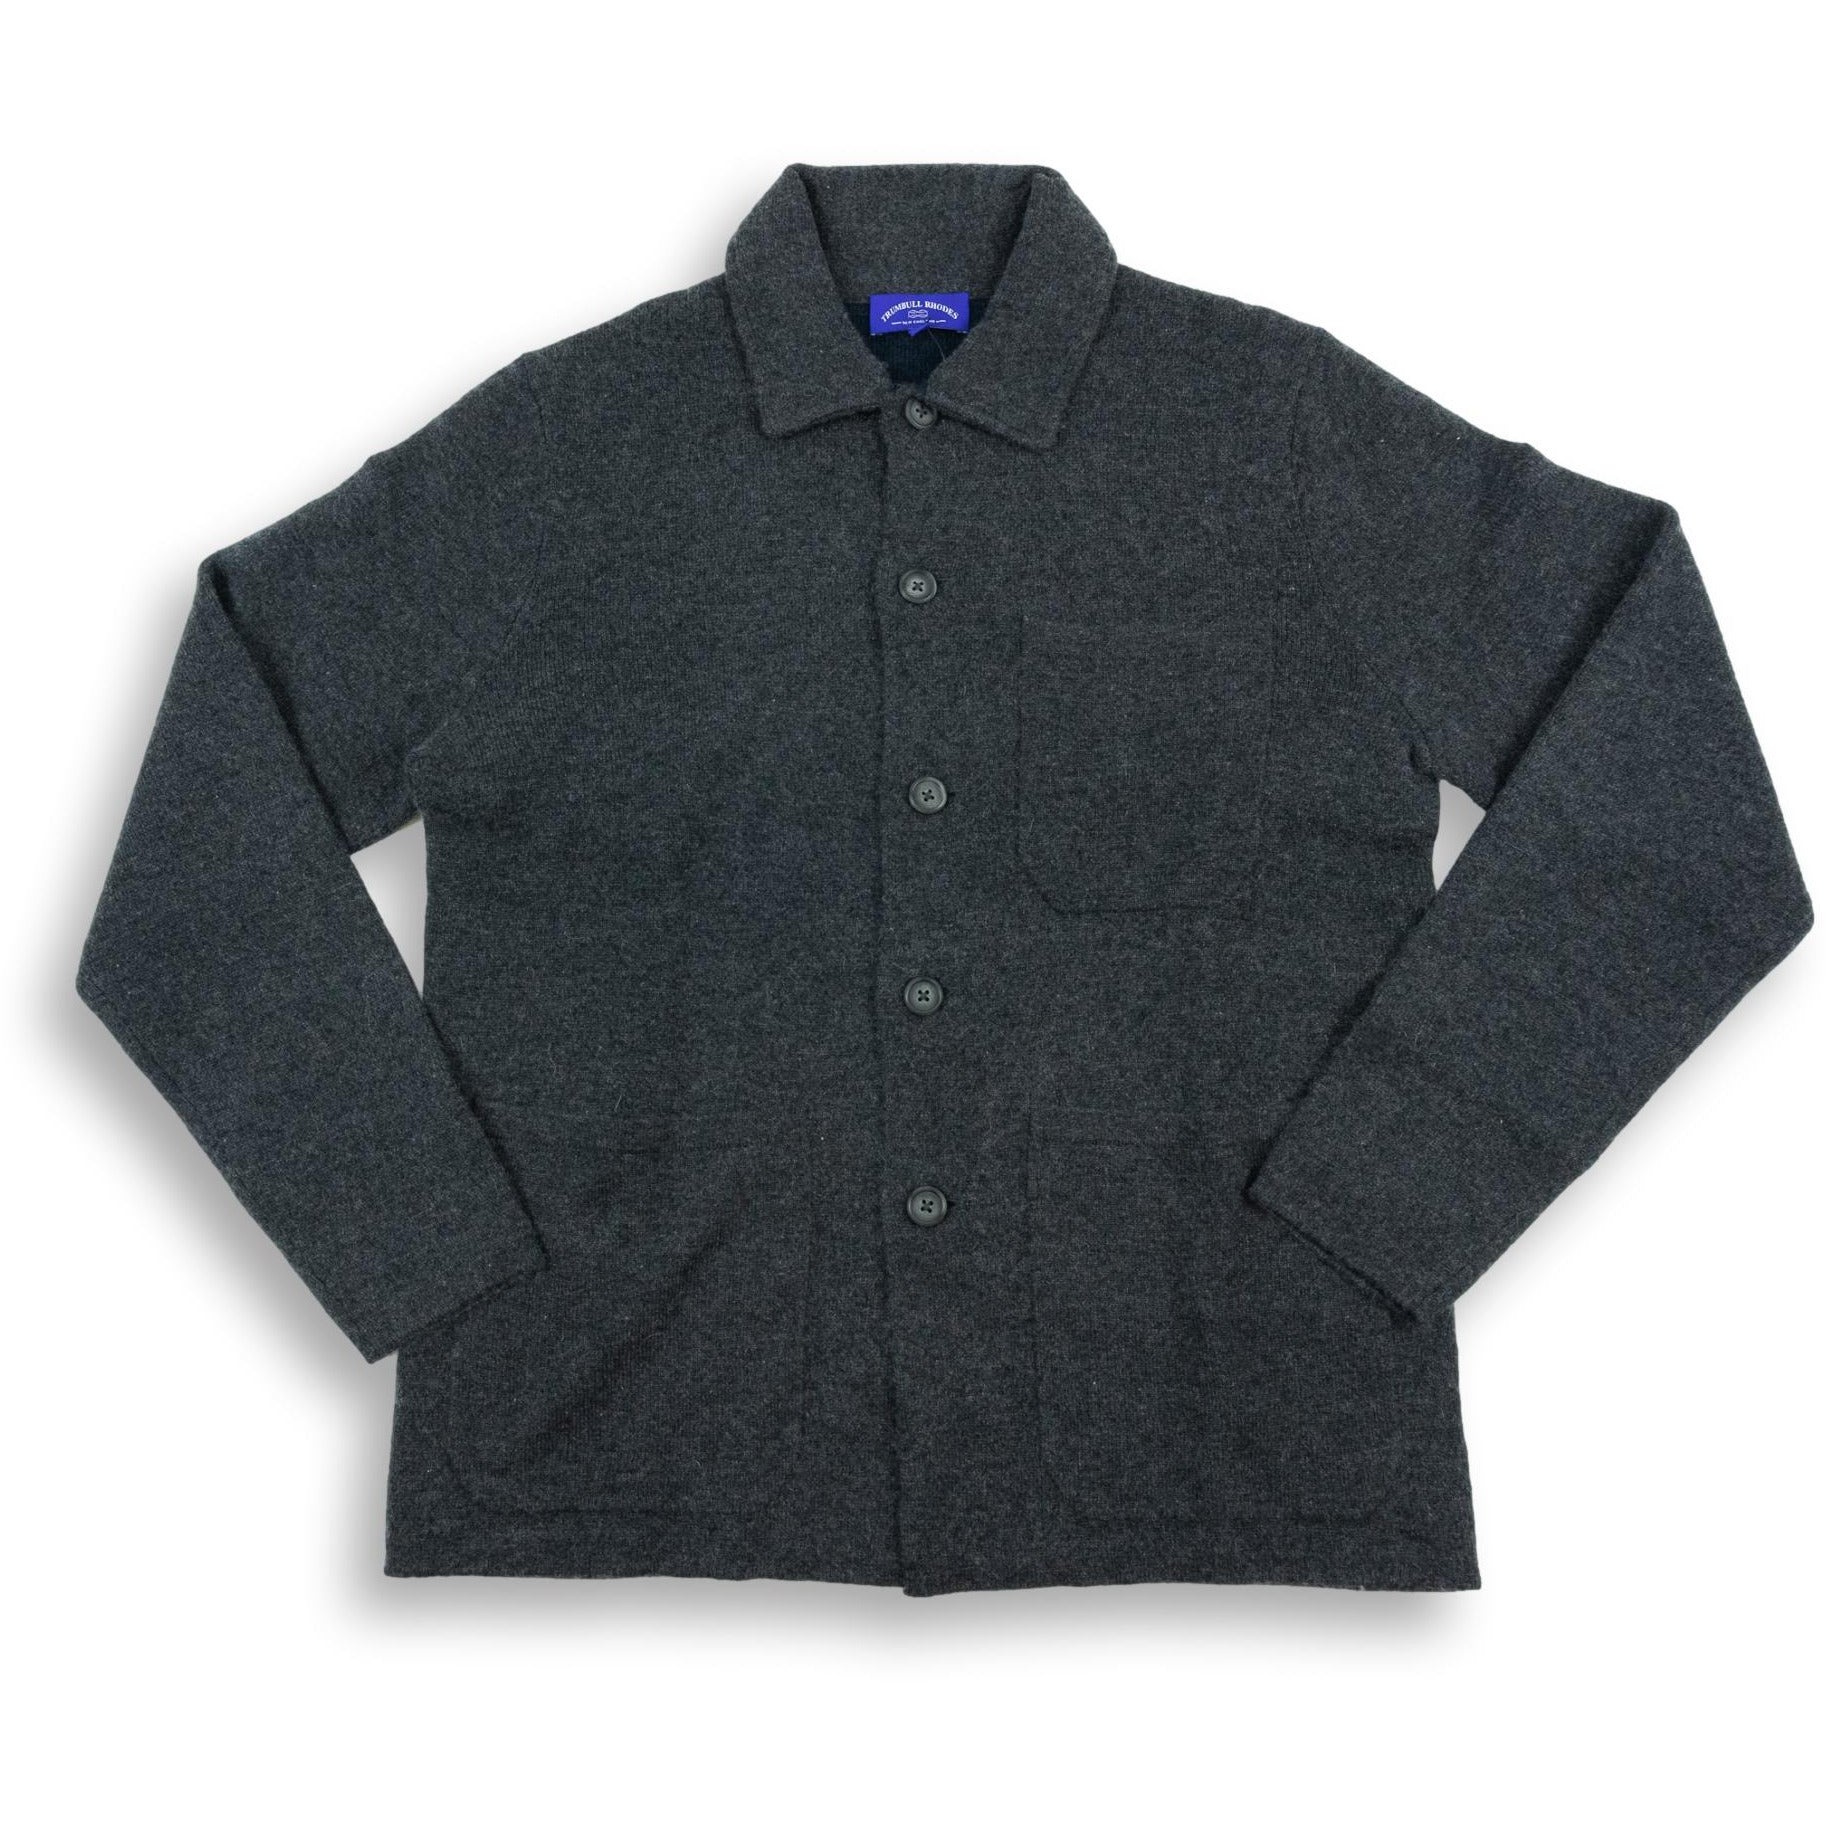 Full Button Cashmere and Wool Blend Sweater Jacket